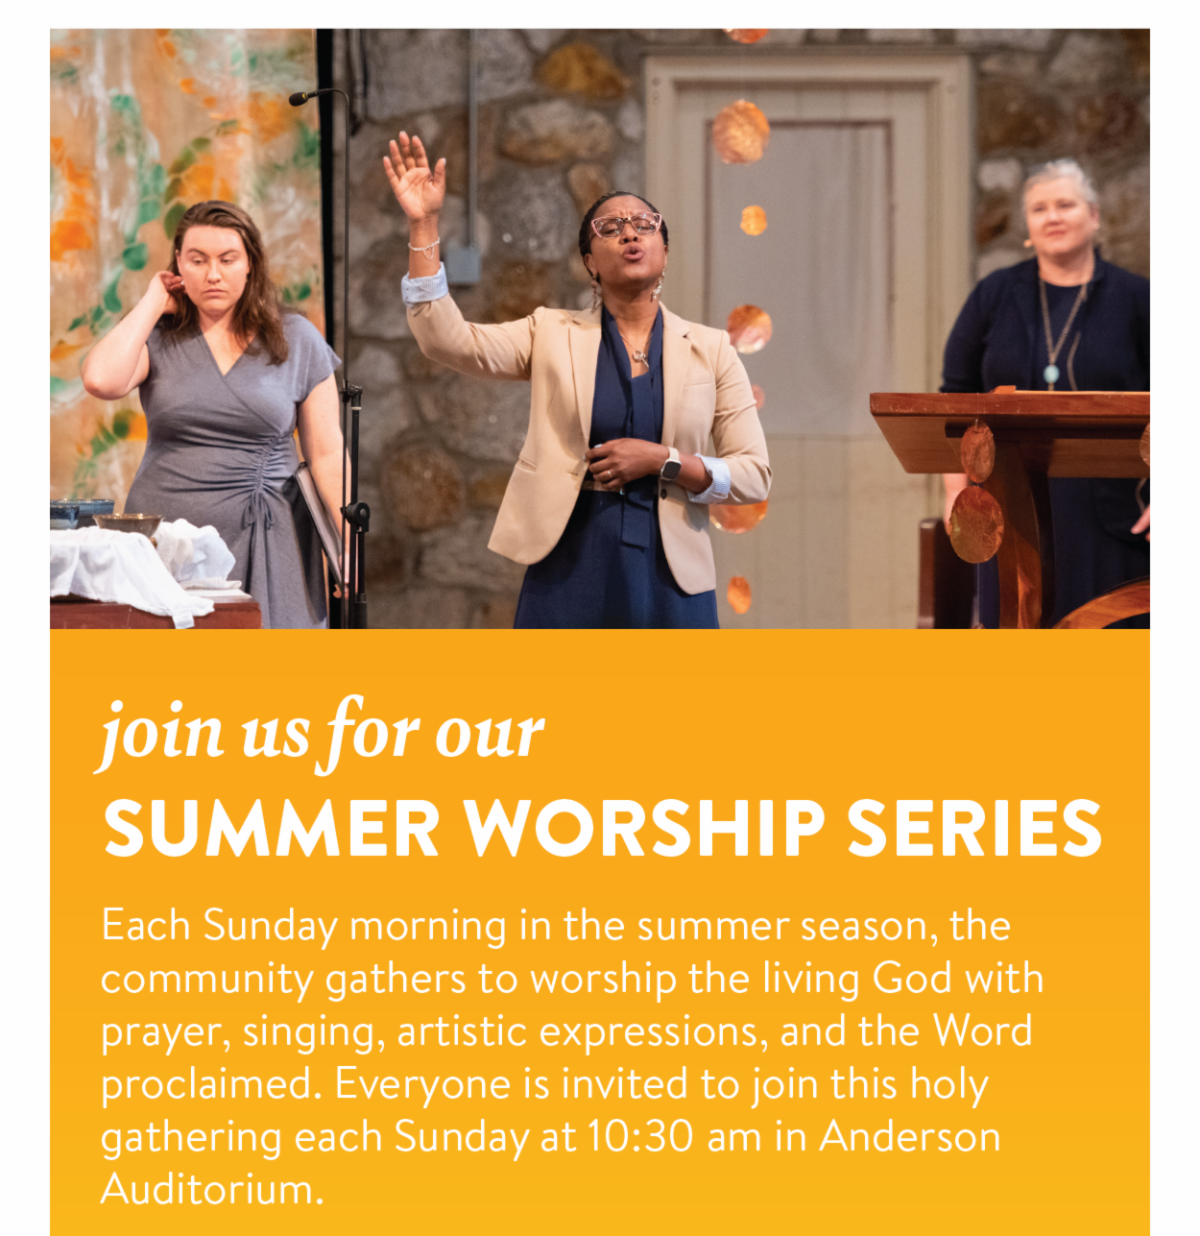 Join us for our Summer Worship Series - Each Sunday morning in the summer season, the community gathers to worship the living God with prayer, singing, artistic expressions, and the Word proclaimed. Everyone is invited to join this holy gathering each Sunday at 10:30 am in Anderson Auditorium.